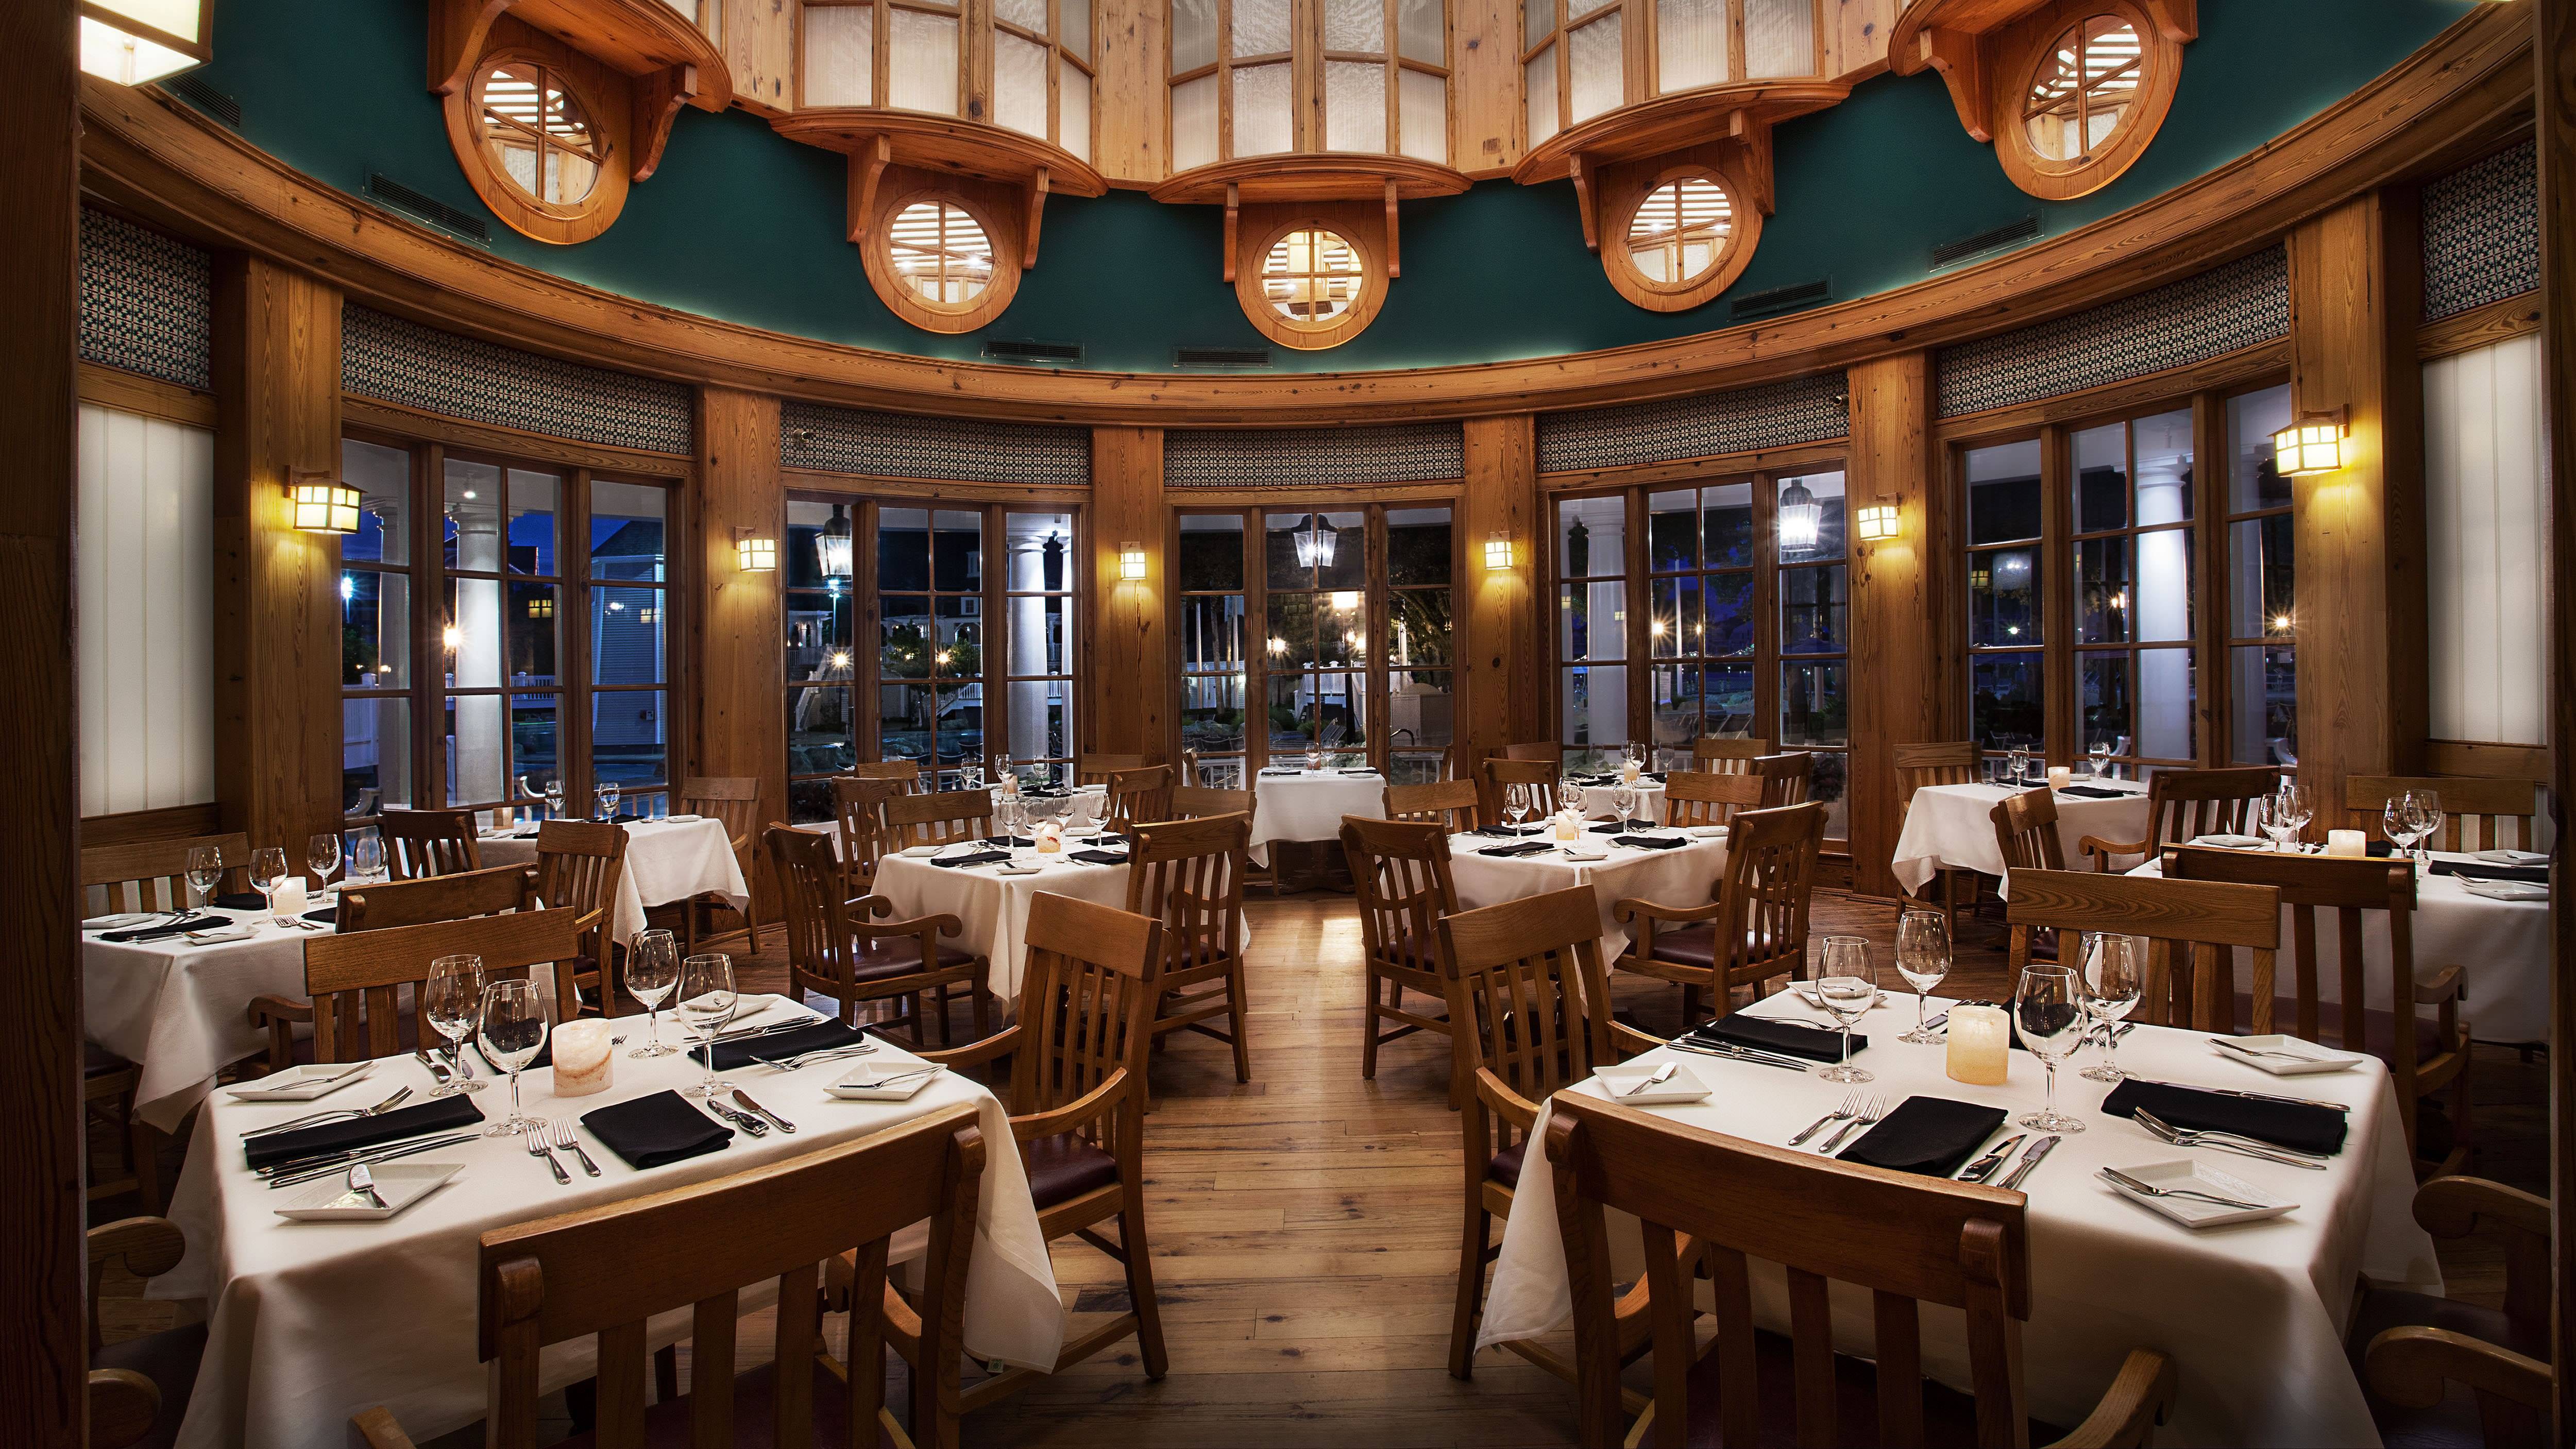 Yachtsman Steakhouse now closed for refurbishment